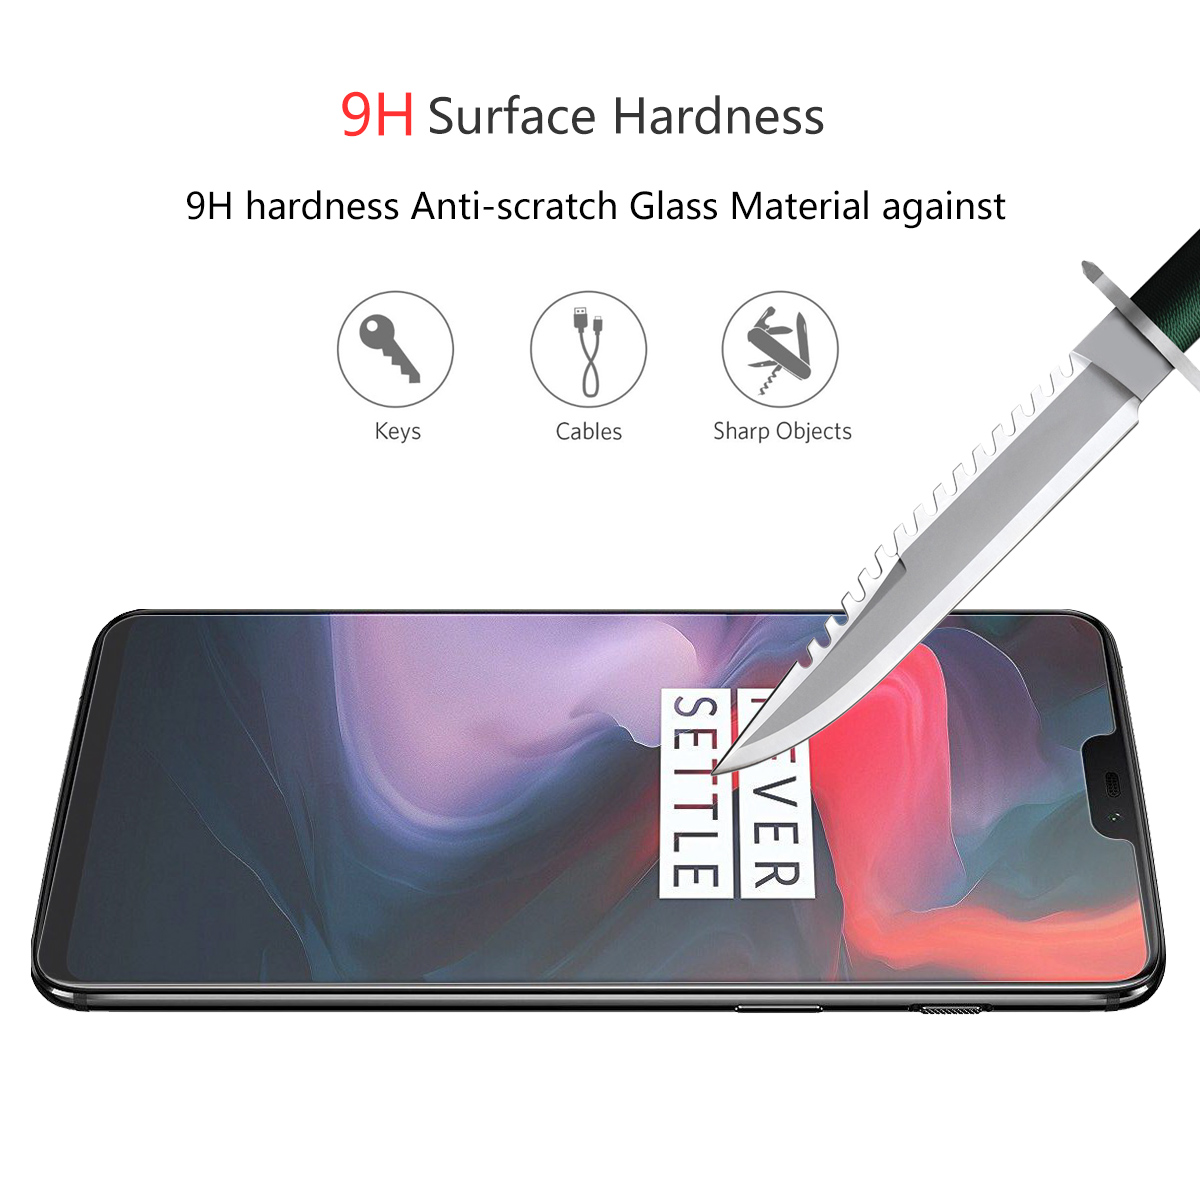 2-Packs-Enkay-Screen-Protector-For-Samsung-Galaxy-A7-2018-25D-Curved-Edge-Tempered-Glass-Film-1368900